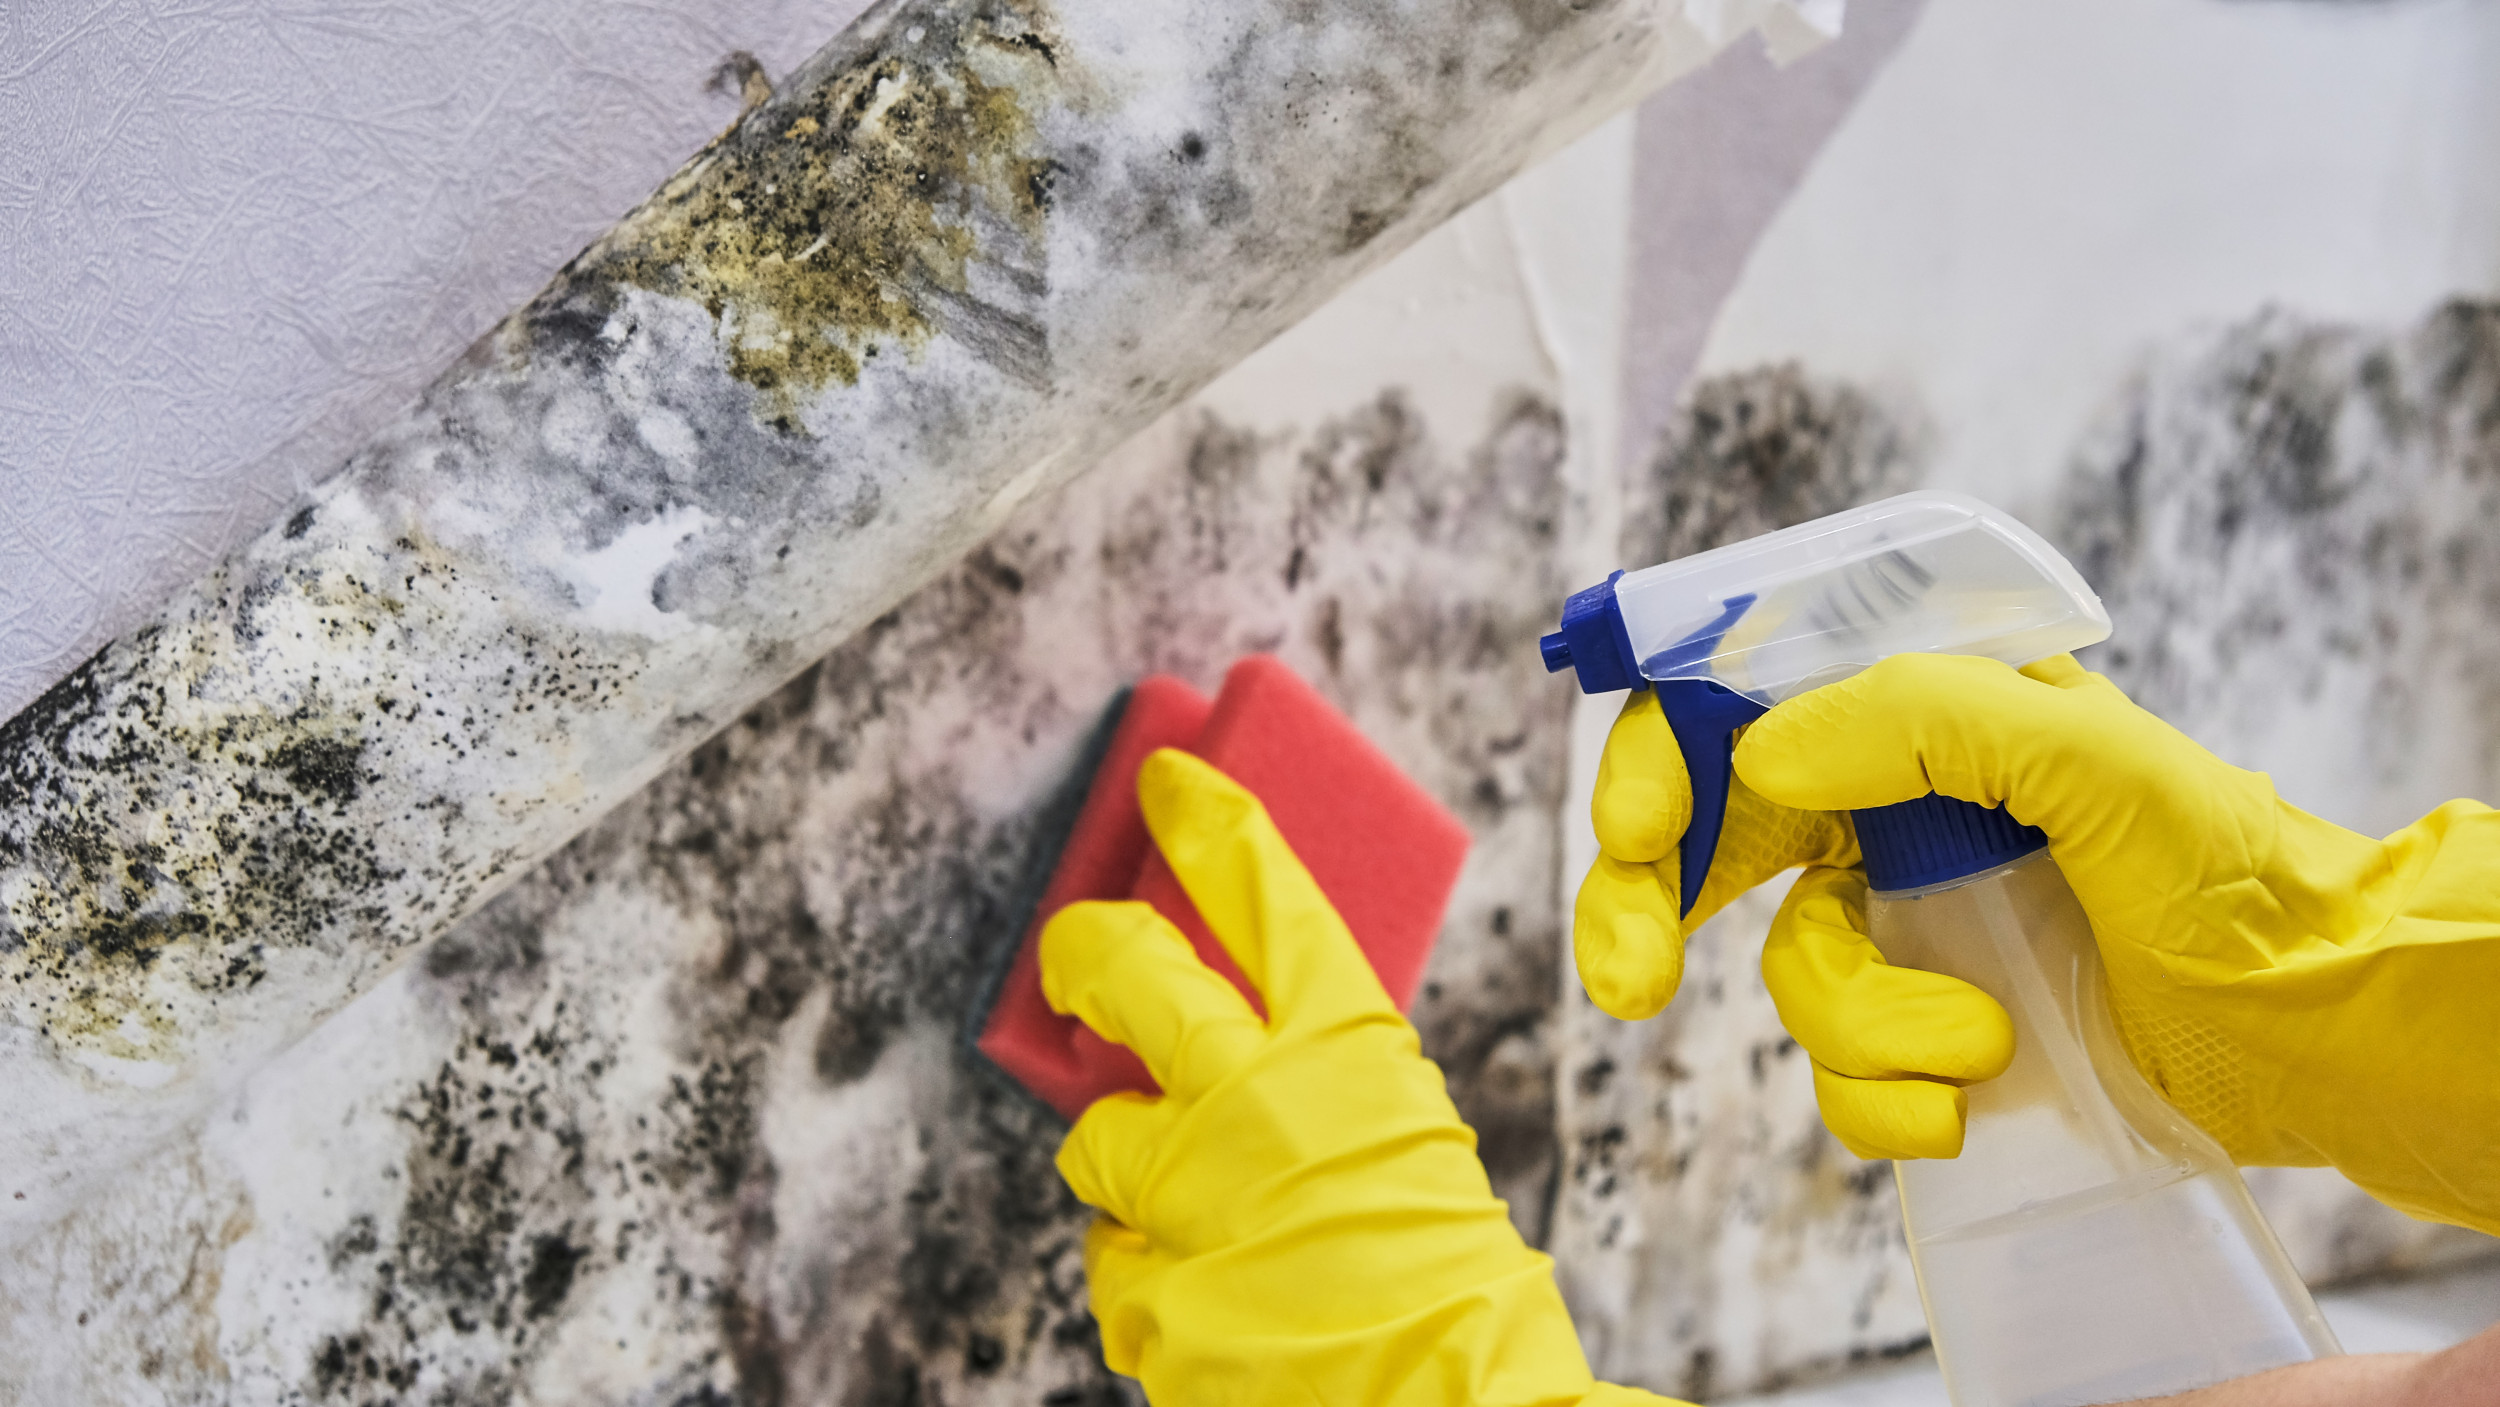 How to Identify & Get Rid of Black Mold From Water Damage